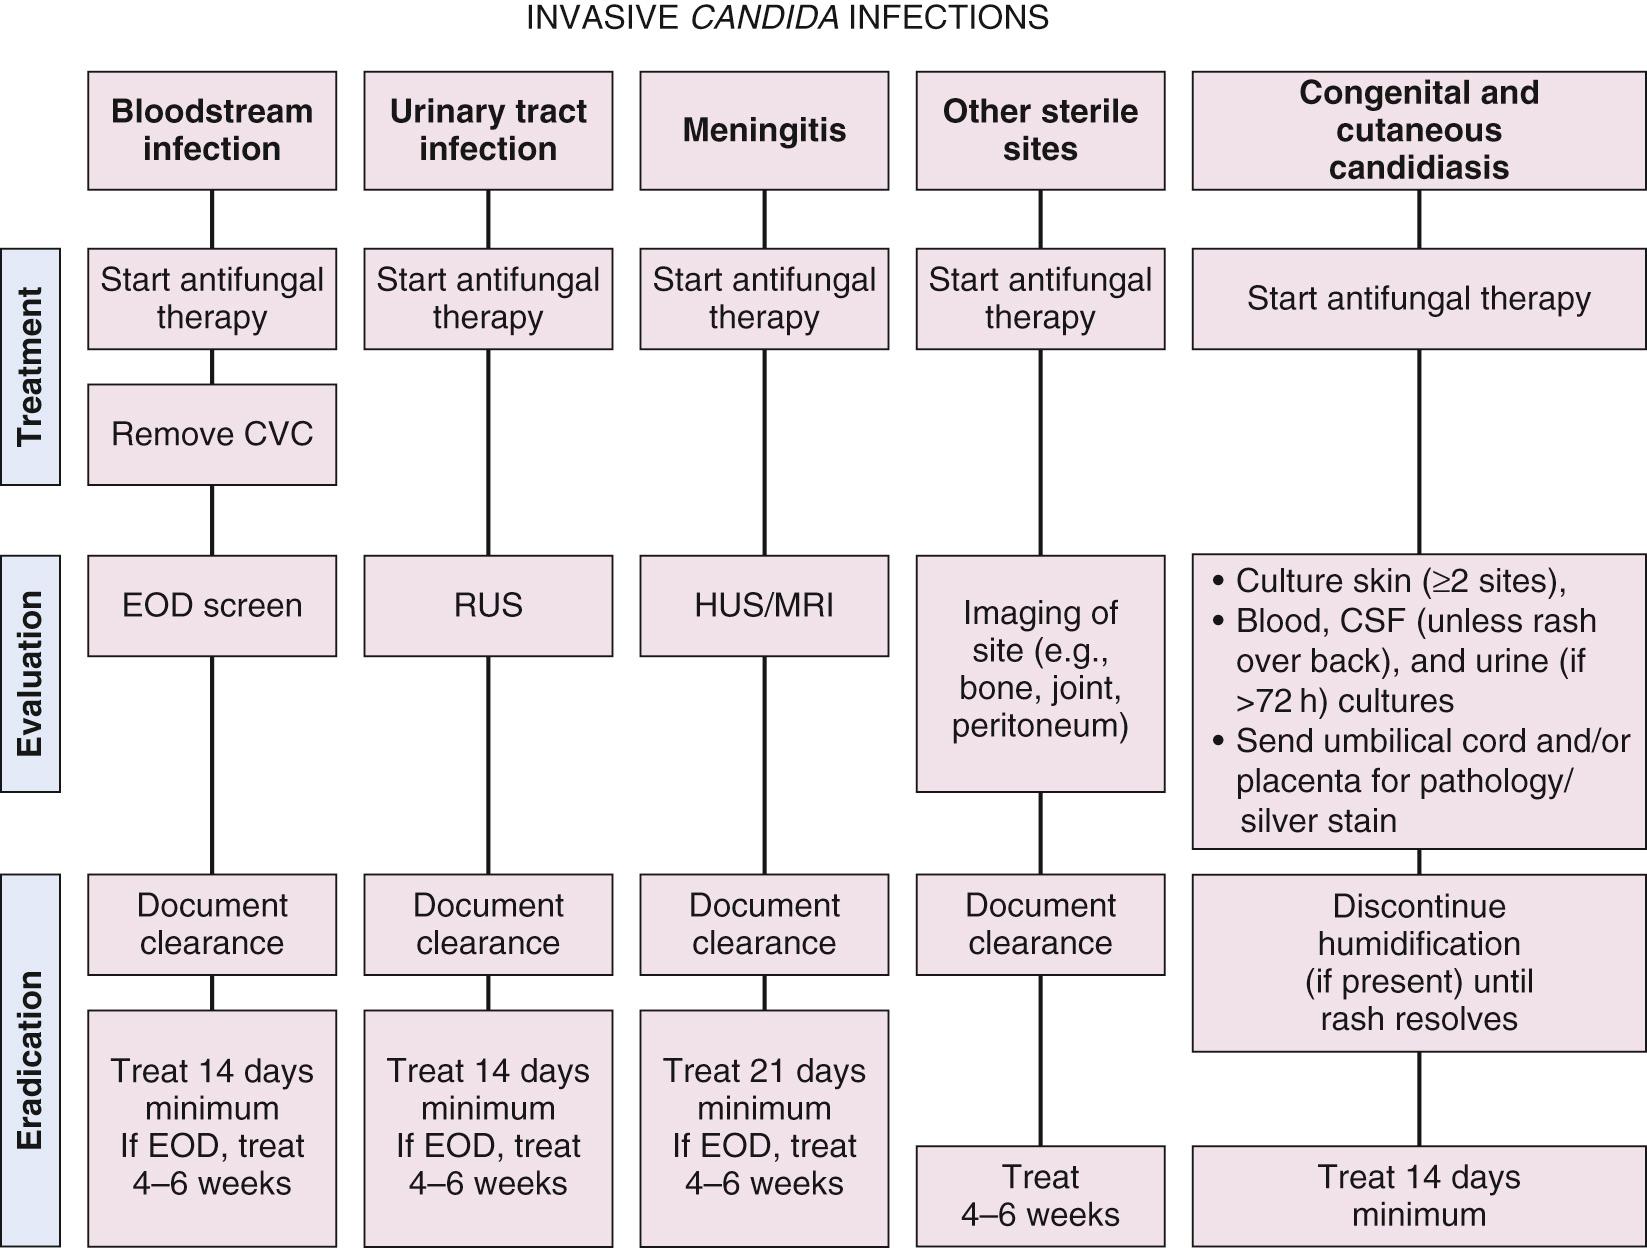 Fig. 49.6, Algorithm for evaluation and treatment of invasive Candida infections in neonates. Initiate therapy pending susceptibilities (see Table 49.5 ). Initial end-organ dissemination screening should be performed at presentation or after 5-7 days of appropriate antifungal treatment. With end-organ dissemination (EOD) meningitis, persistent candidemia greater than 7 days, combination therapy with a second antifungal is recommended based on susceptibilities (fluconazole is most commonly selected due to water solubility and CSF penetration). EOD screen includes surveillance for cardiac, renal, eye, and brain involvement. If bowel disease such as necrotizing enterocolitis or focal bowel perforation is present, complete abdominal ultrasound for abscess should be performed. BSI, Bloodstream infection; CCC, congenital cutaneous candidiasis; CVC, central venous catheter; HUS, head ultrasound; ICI, invasive Candida infections; MRI, magnetic resonance imaging; RUS, renal ultrasound; UTI, urinary tract infection.